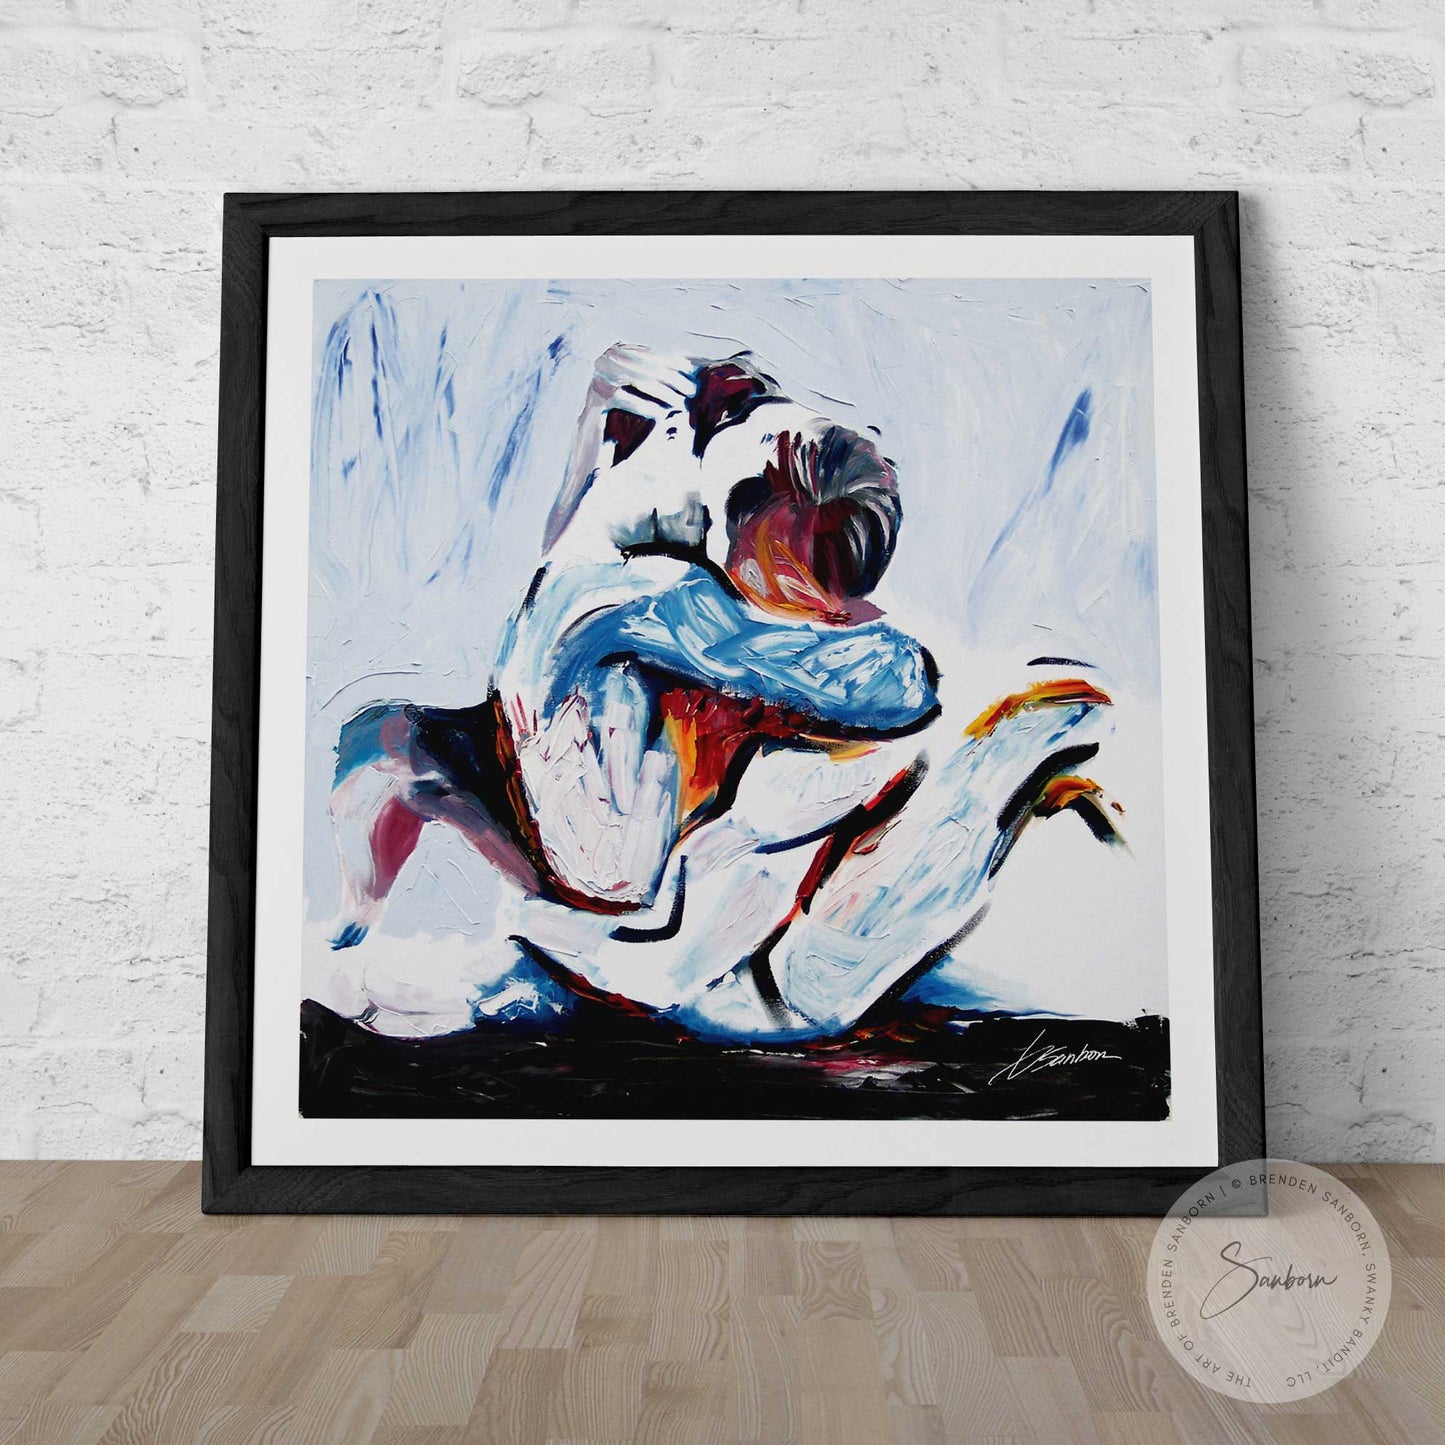 Two Men in Love Tightly Embraced - Giclee Art Print